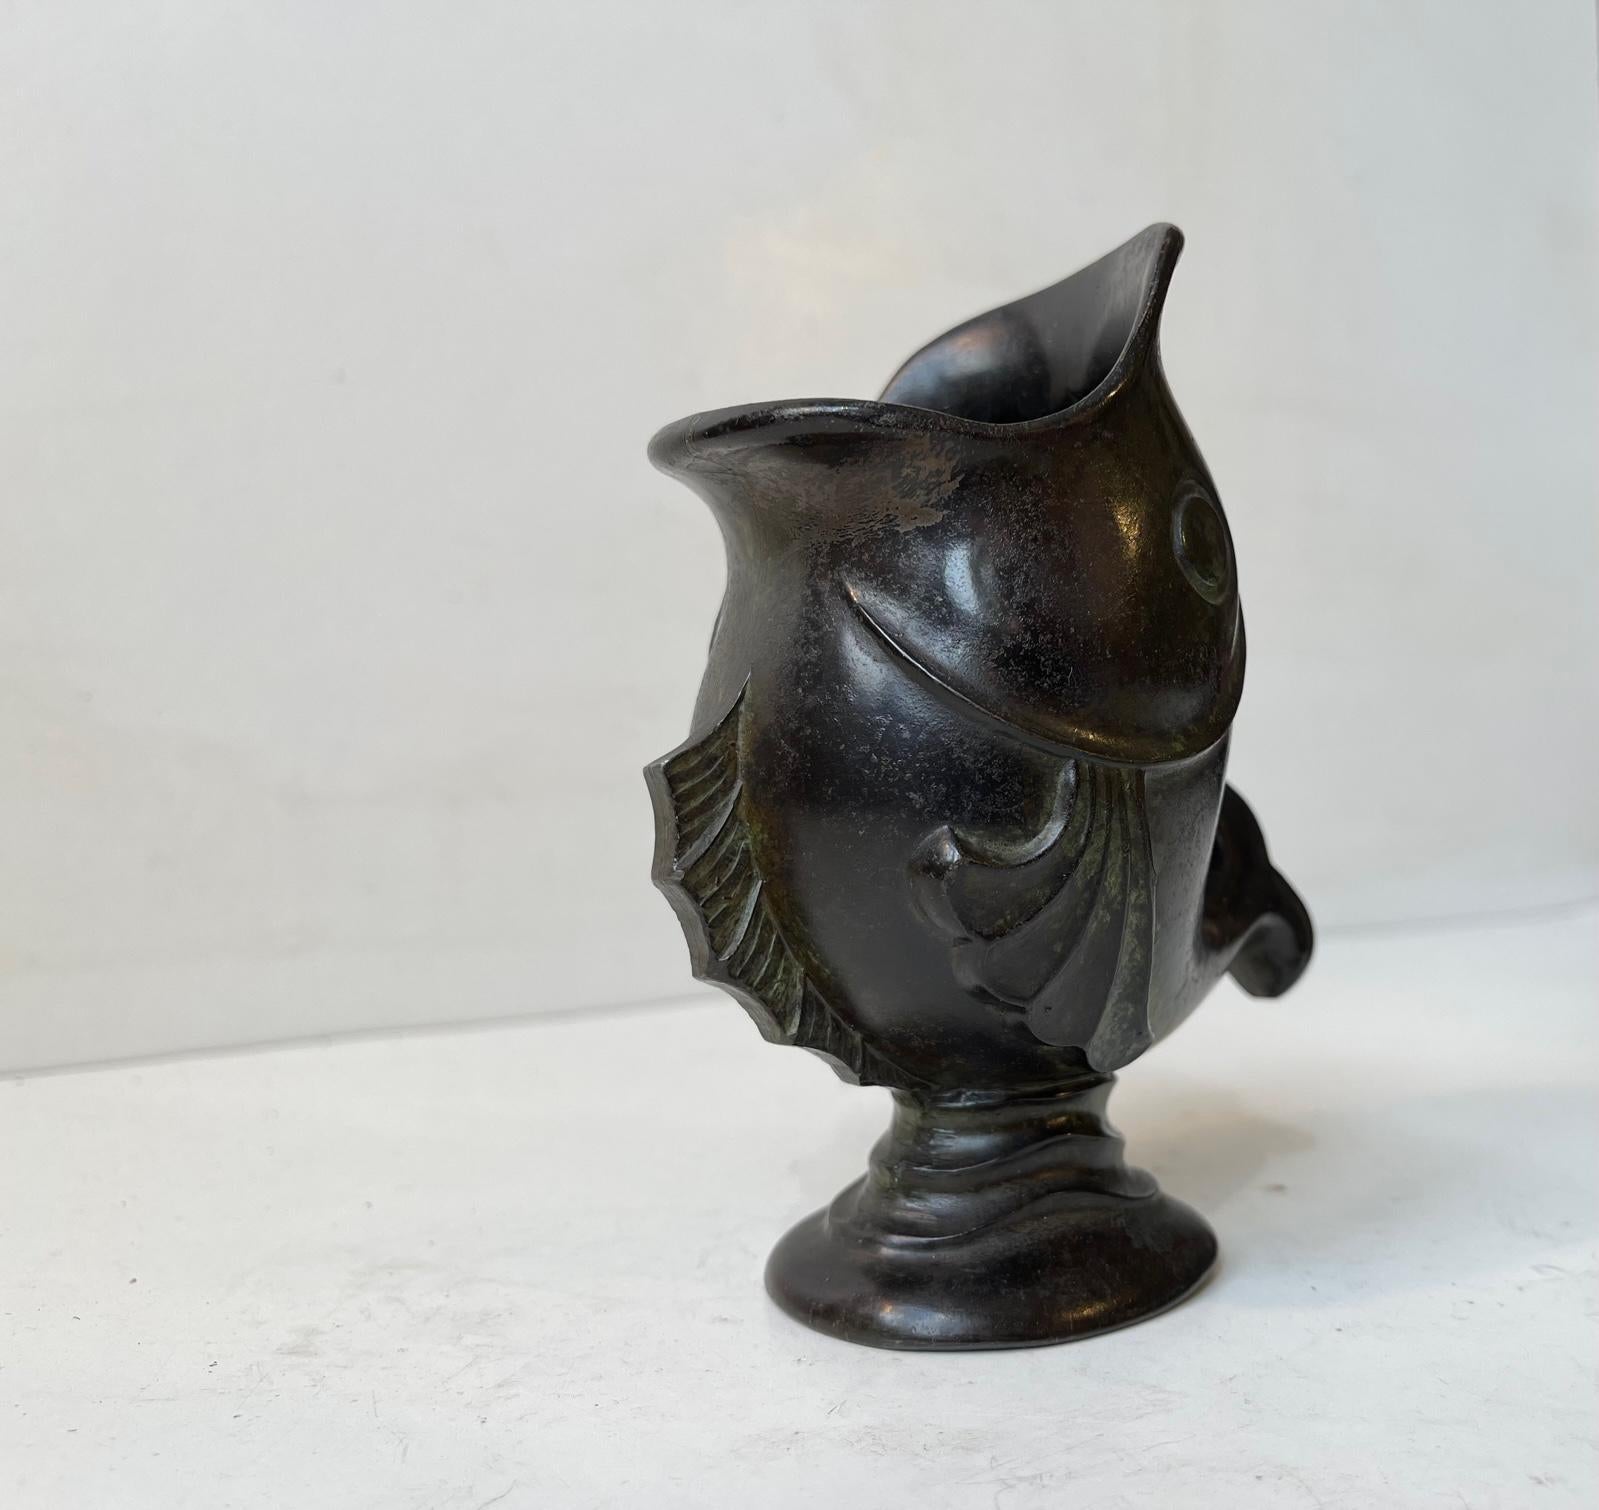 A small figural vase depicting a rising koi fish. It made from patinated metal/metals and is of Scandinavian origin. Possibly a slip-up from Just Andersen since it has no markings but is very much in his style. Measurements: H: 13 cm, W: 11 cm,